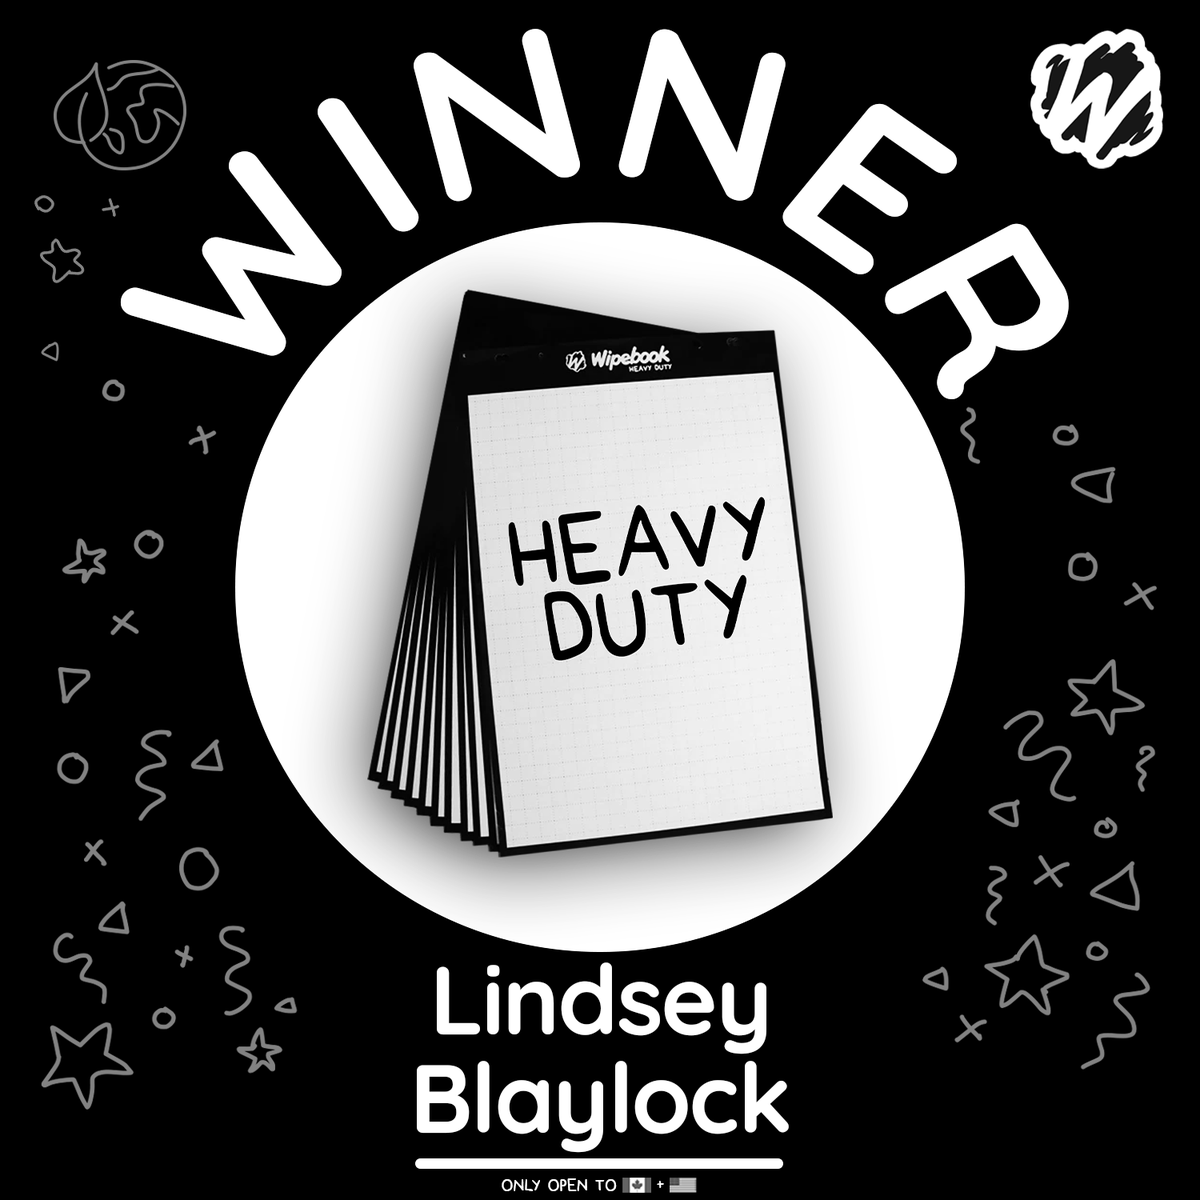 Congratulations Lindsey Blaylock, our weekly Heavy Duty Flipchart winner! 💪 Enter the NEW WEEKLY Raffle: wipebook.com/heavydutyX #heavyduty #flipchart #contest #giveaway #win